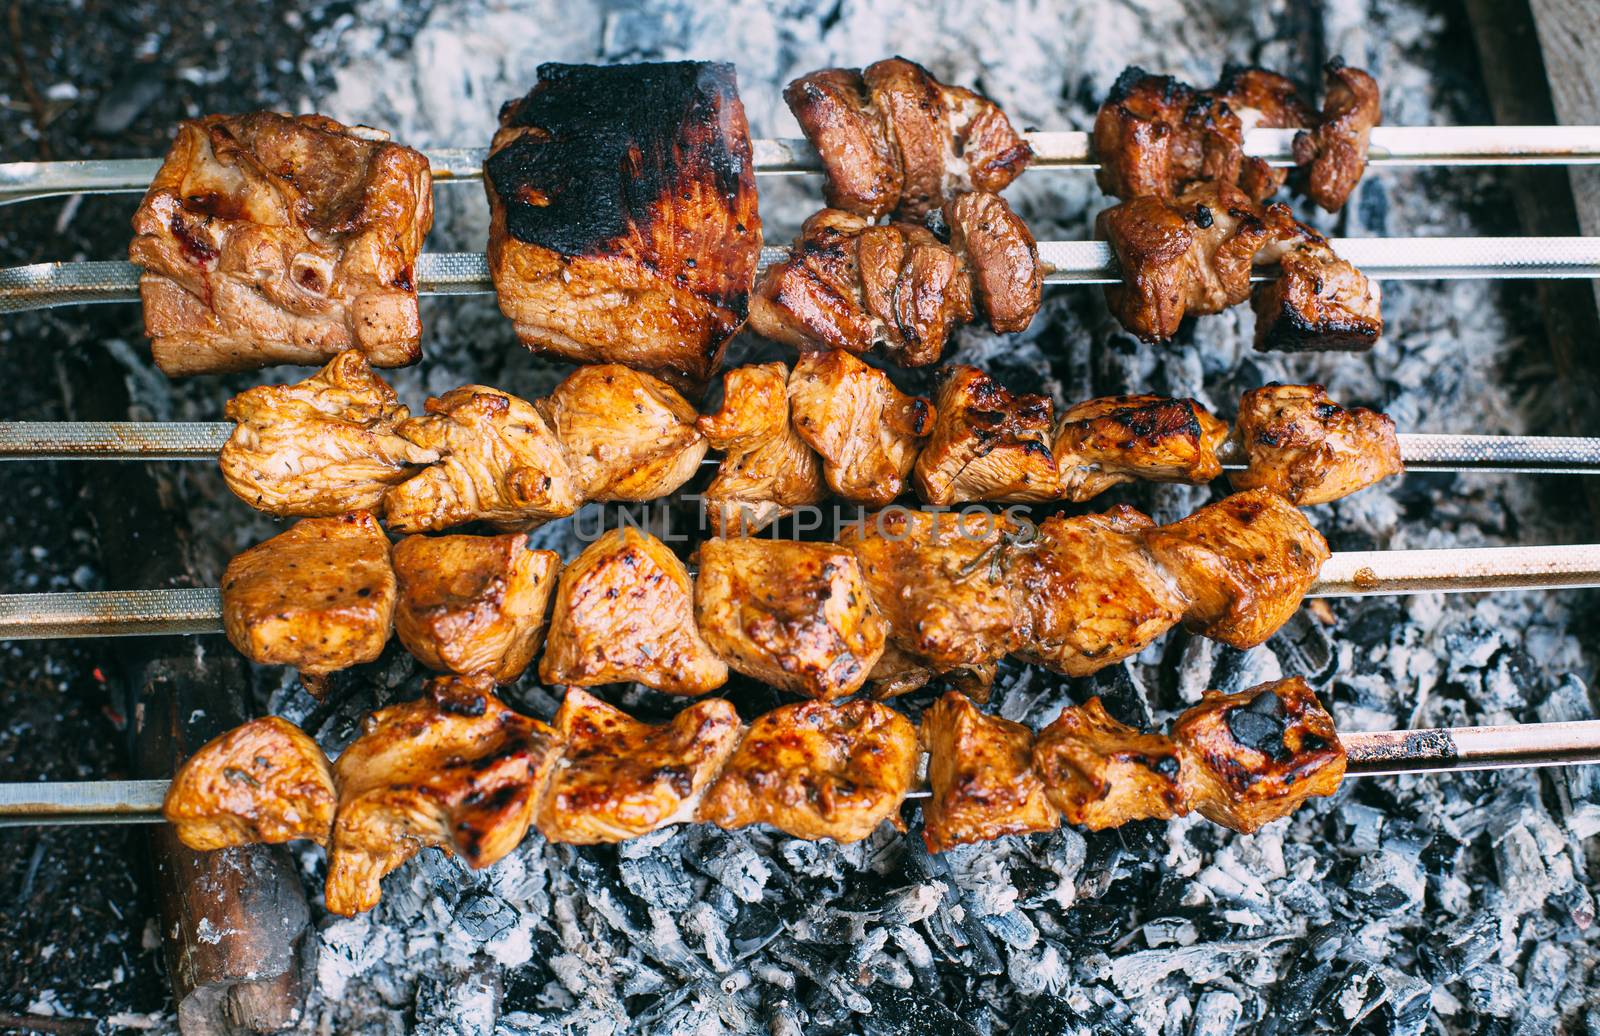 Chicken skewers on skewers on fire. Cooking meat outdoors in the by Opikanets